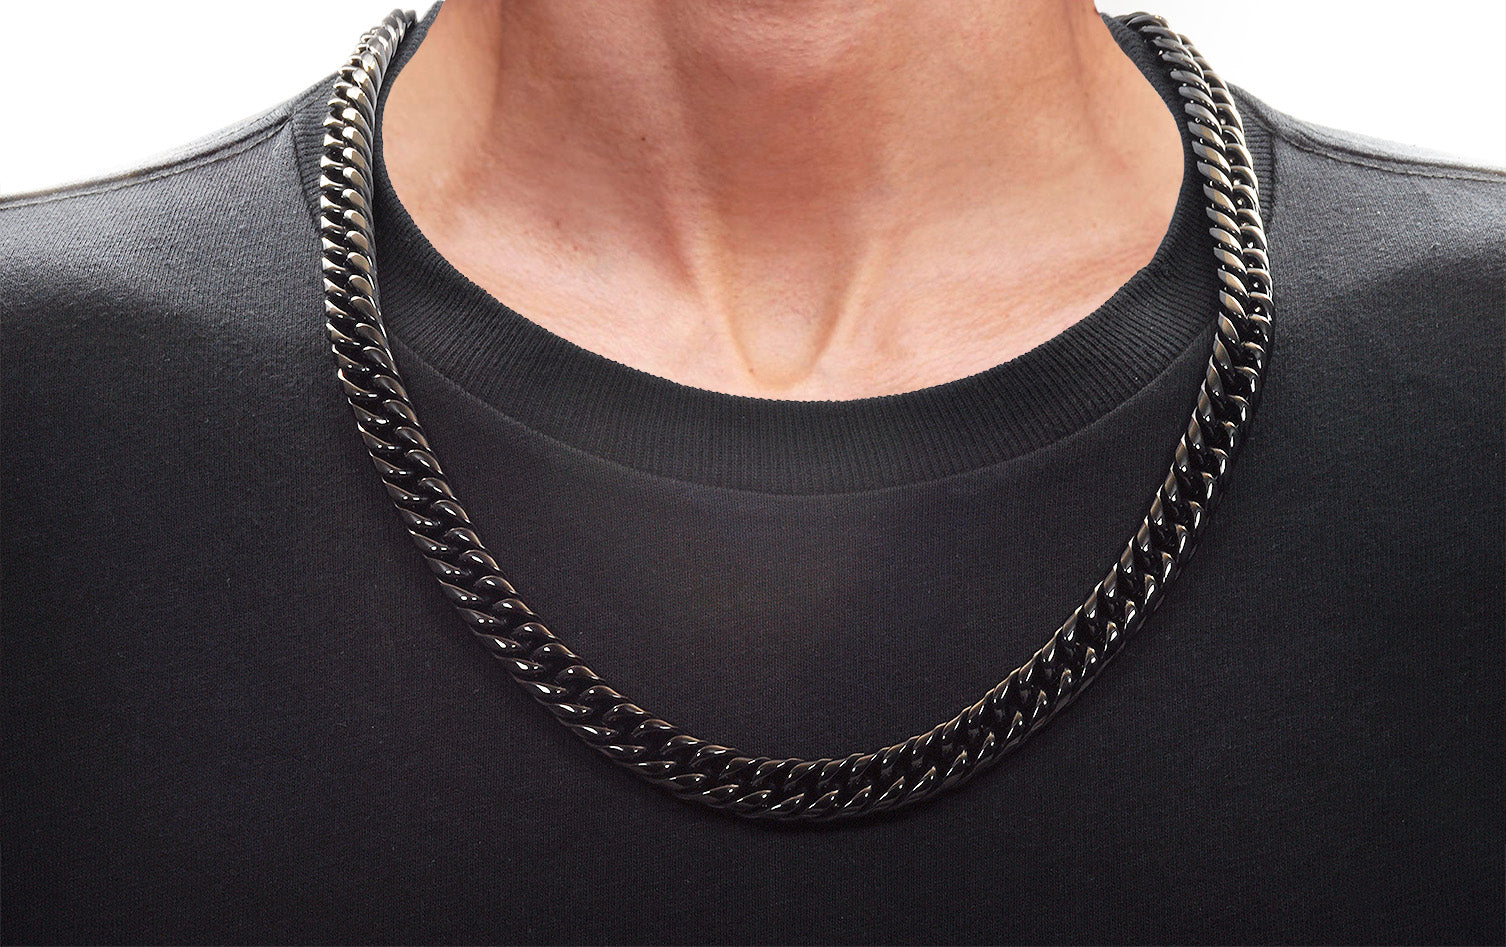 Mens Gothic Double Layered Gothic Pendant With Spider Design Trendy Punk  Collar Chain For Clavicle And Personality Cool Mens Jewelry From Annetteny,  $7.72 | DHgate.Com